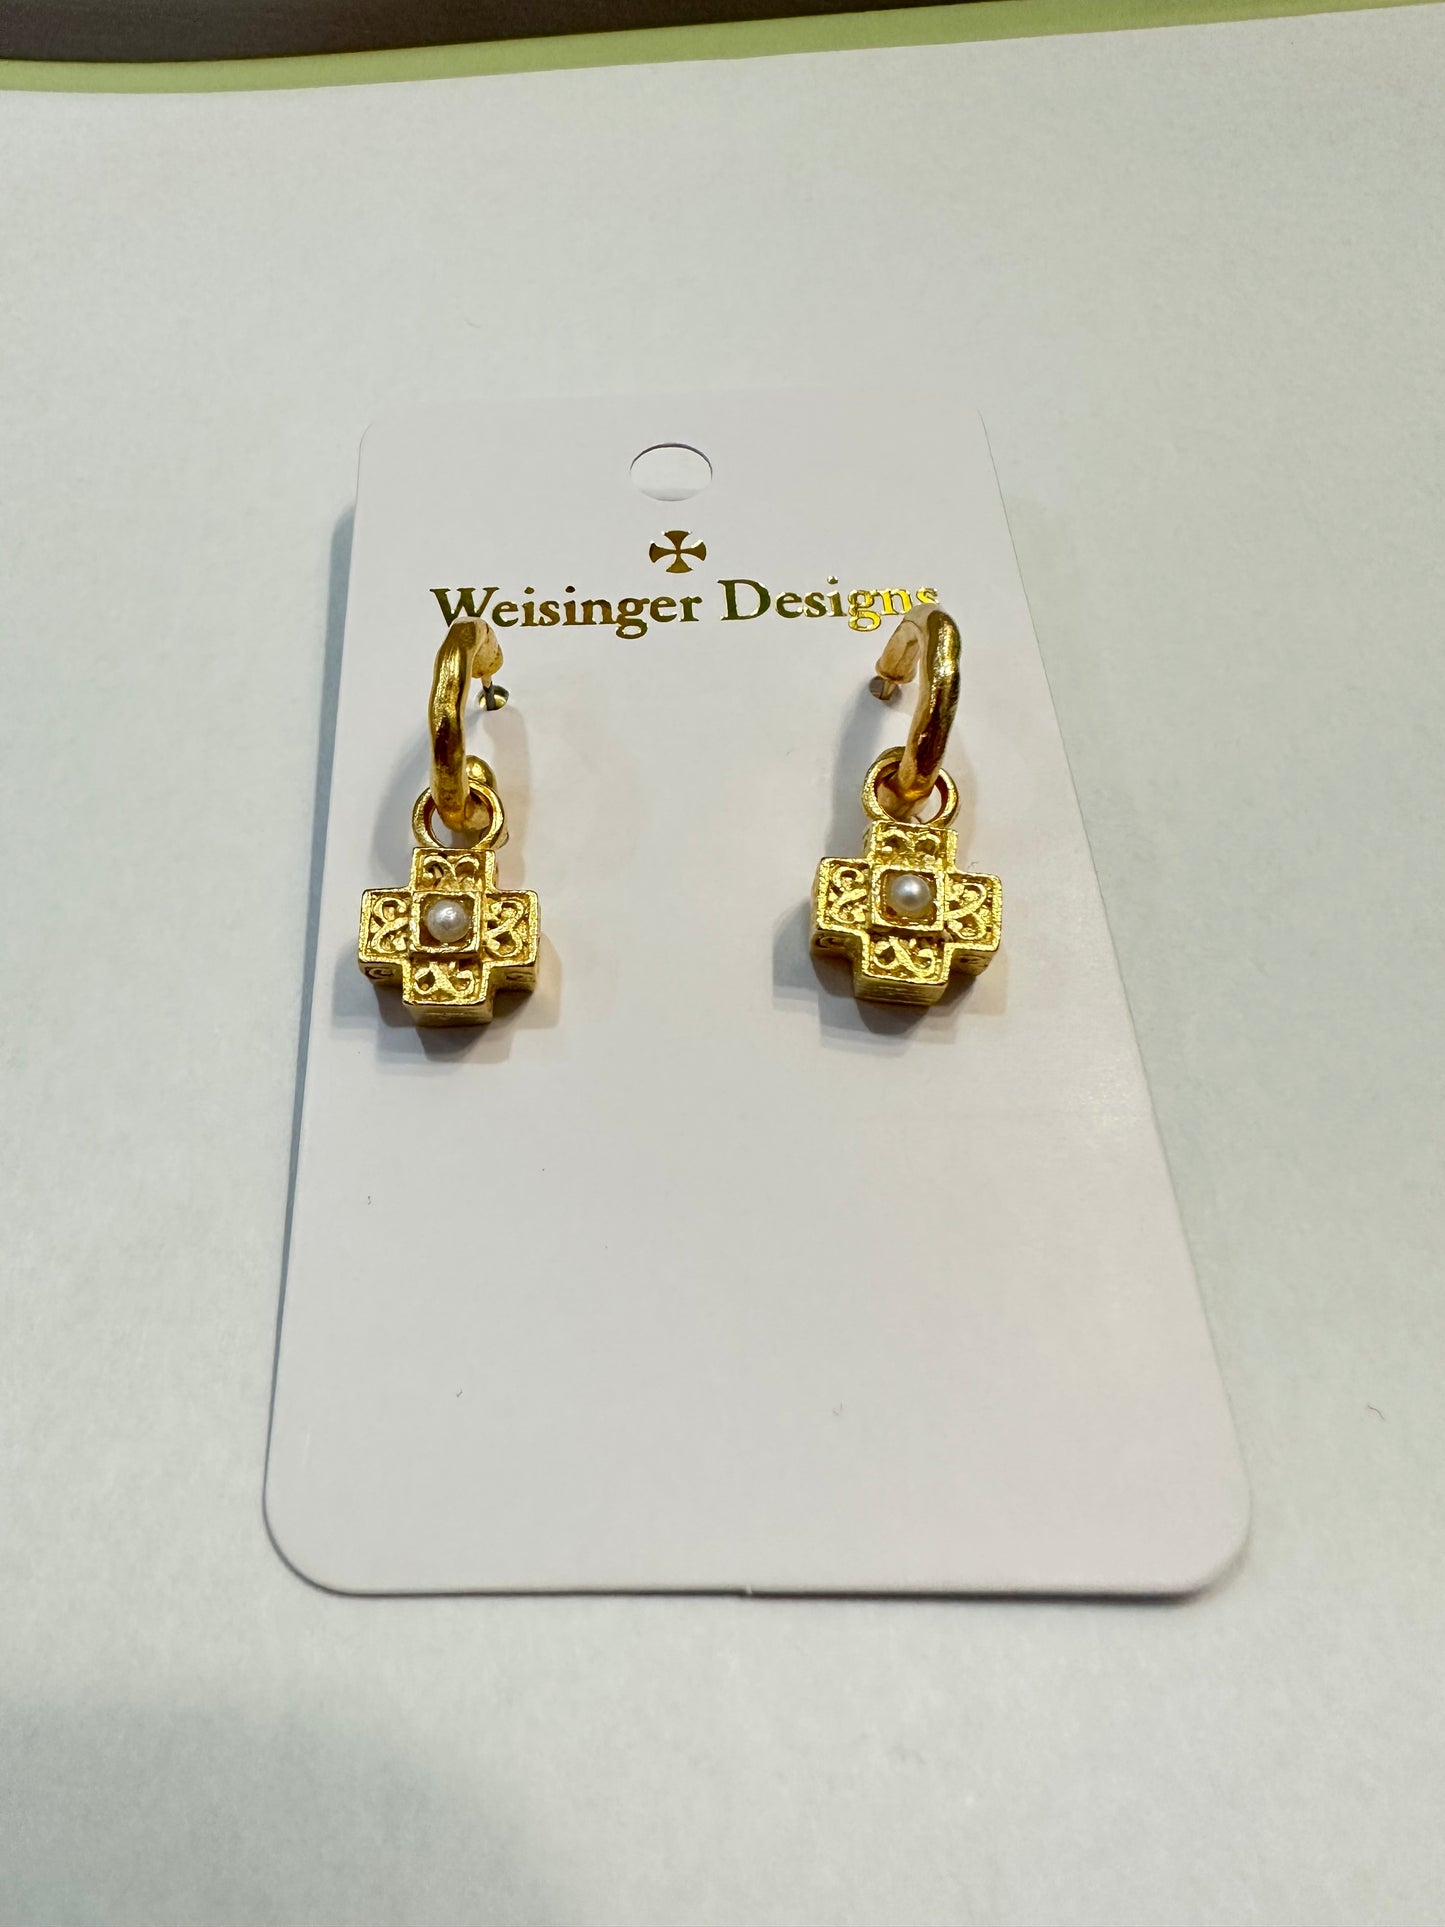 A pair of high-quality Weisinger Designs gold-plated earrings featuring a Filigree Cross with Pearl Center on Hoop Stud design on a card.